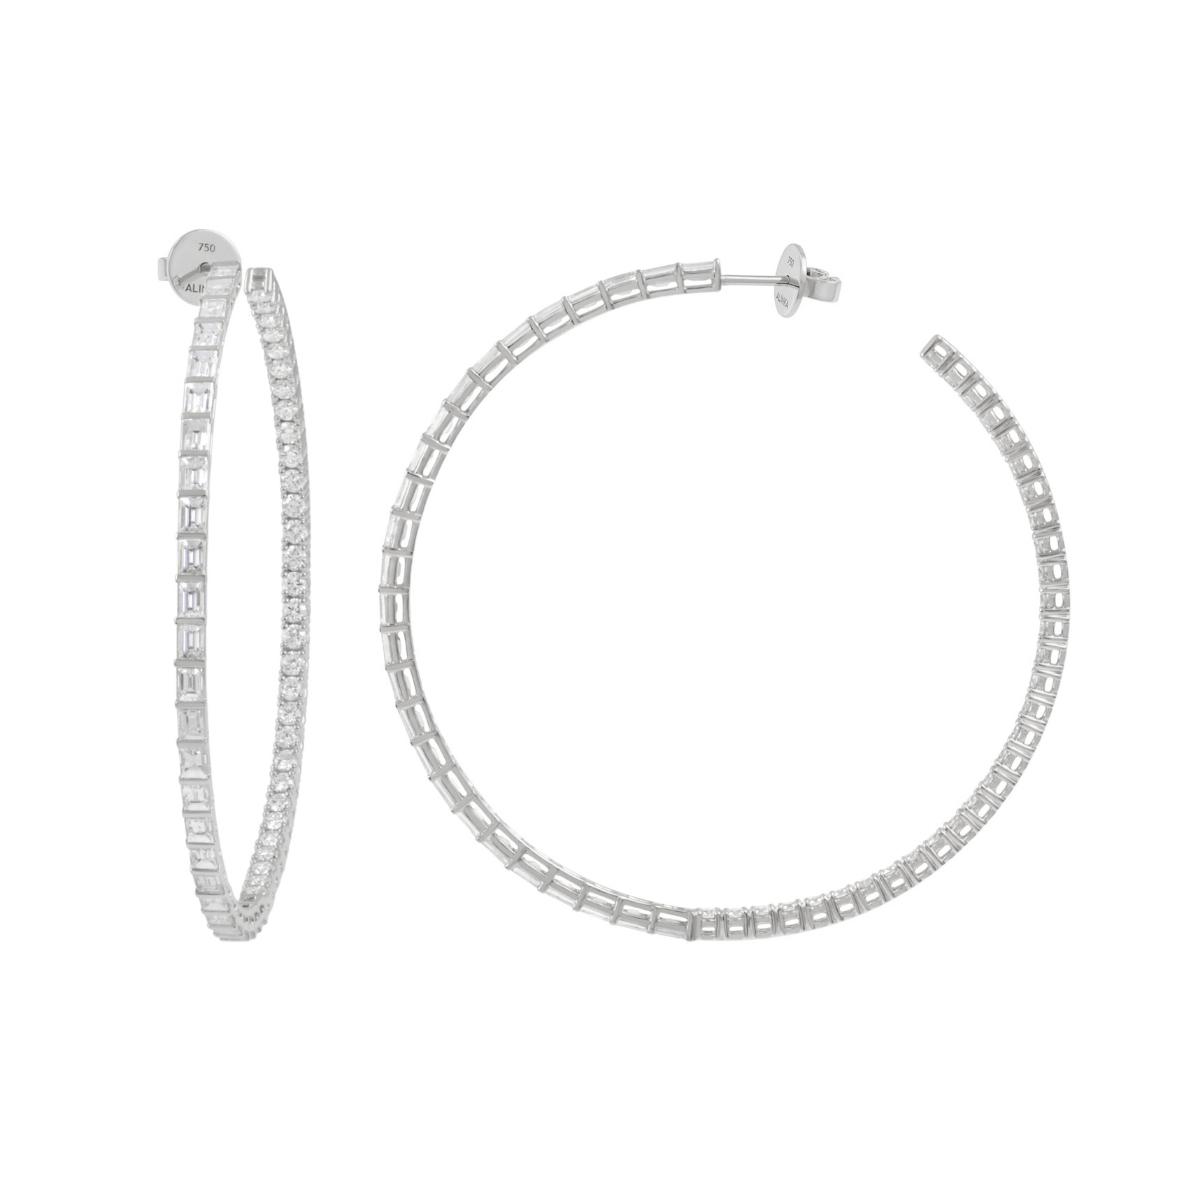 AMALFI Hoops in white gold pair